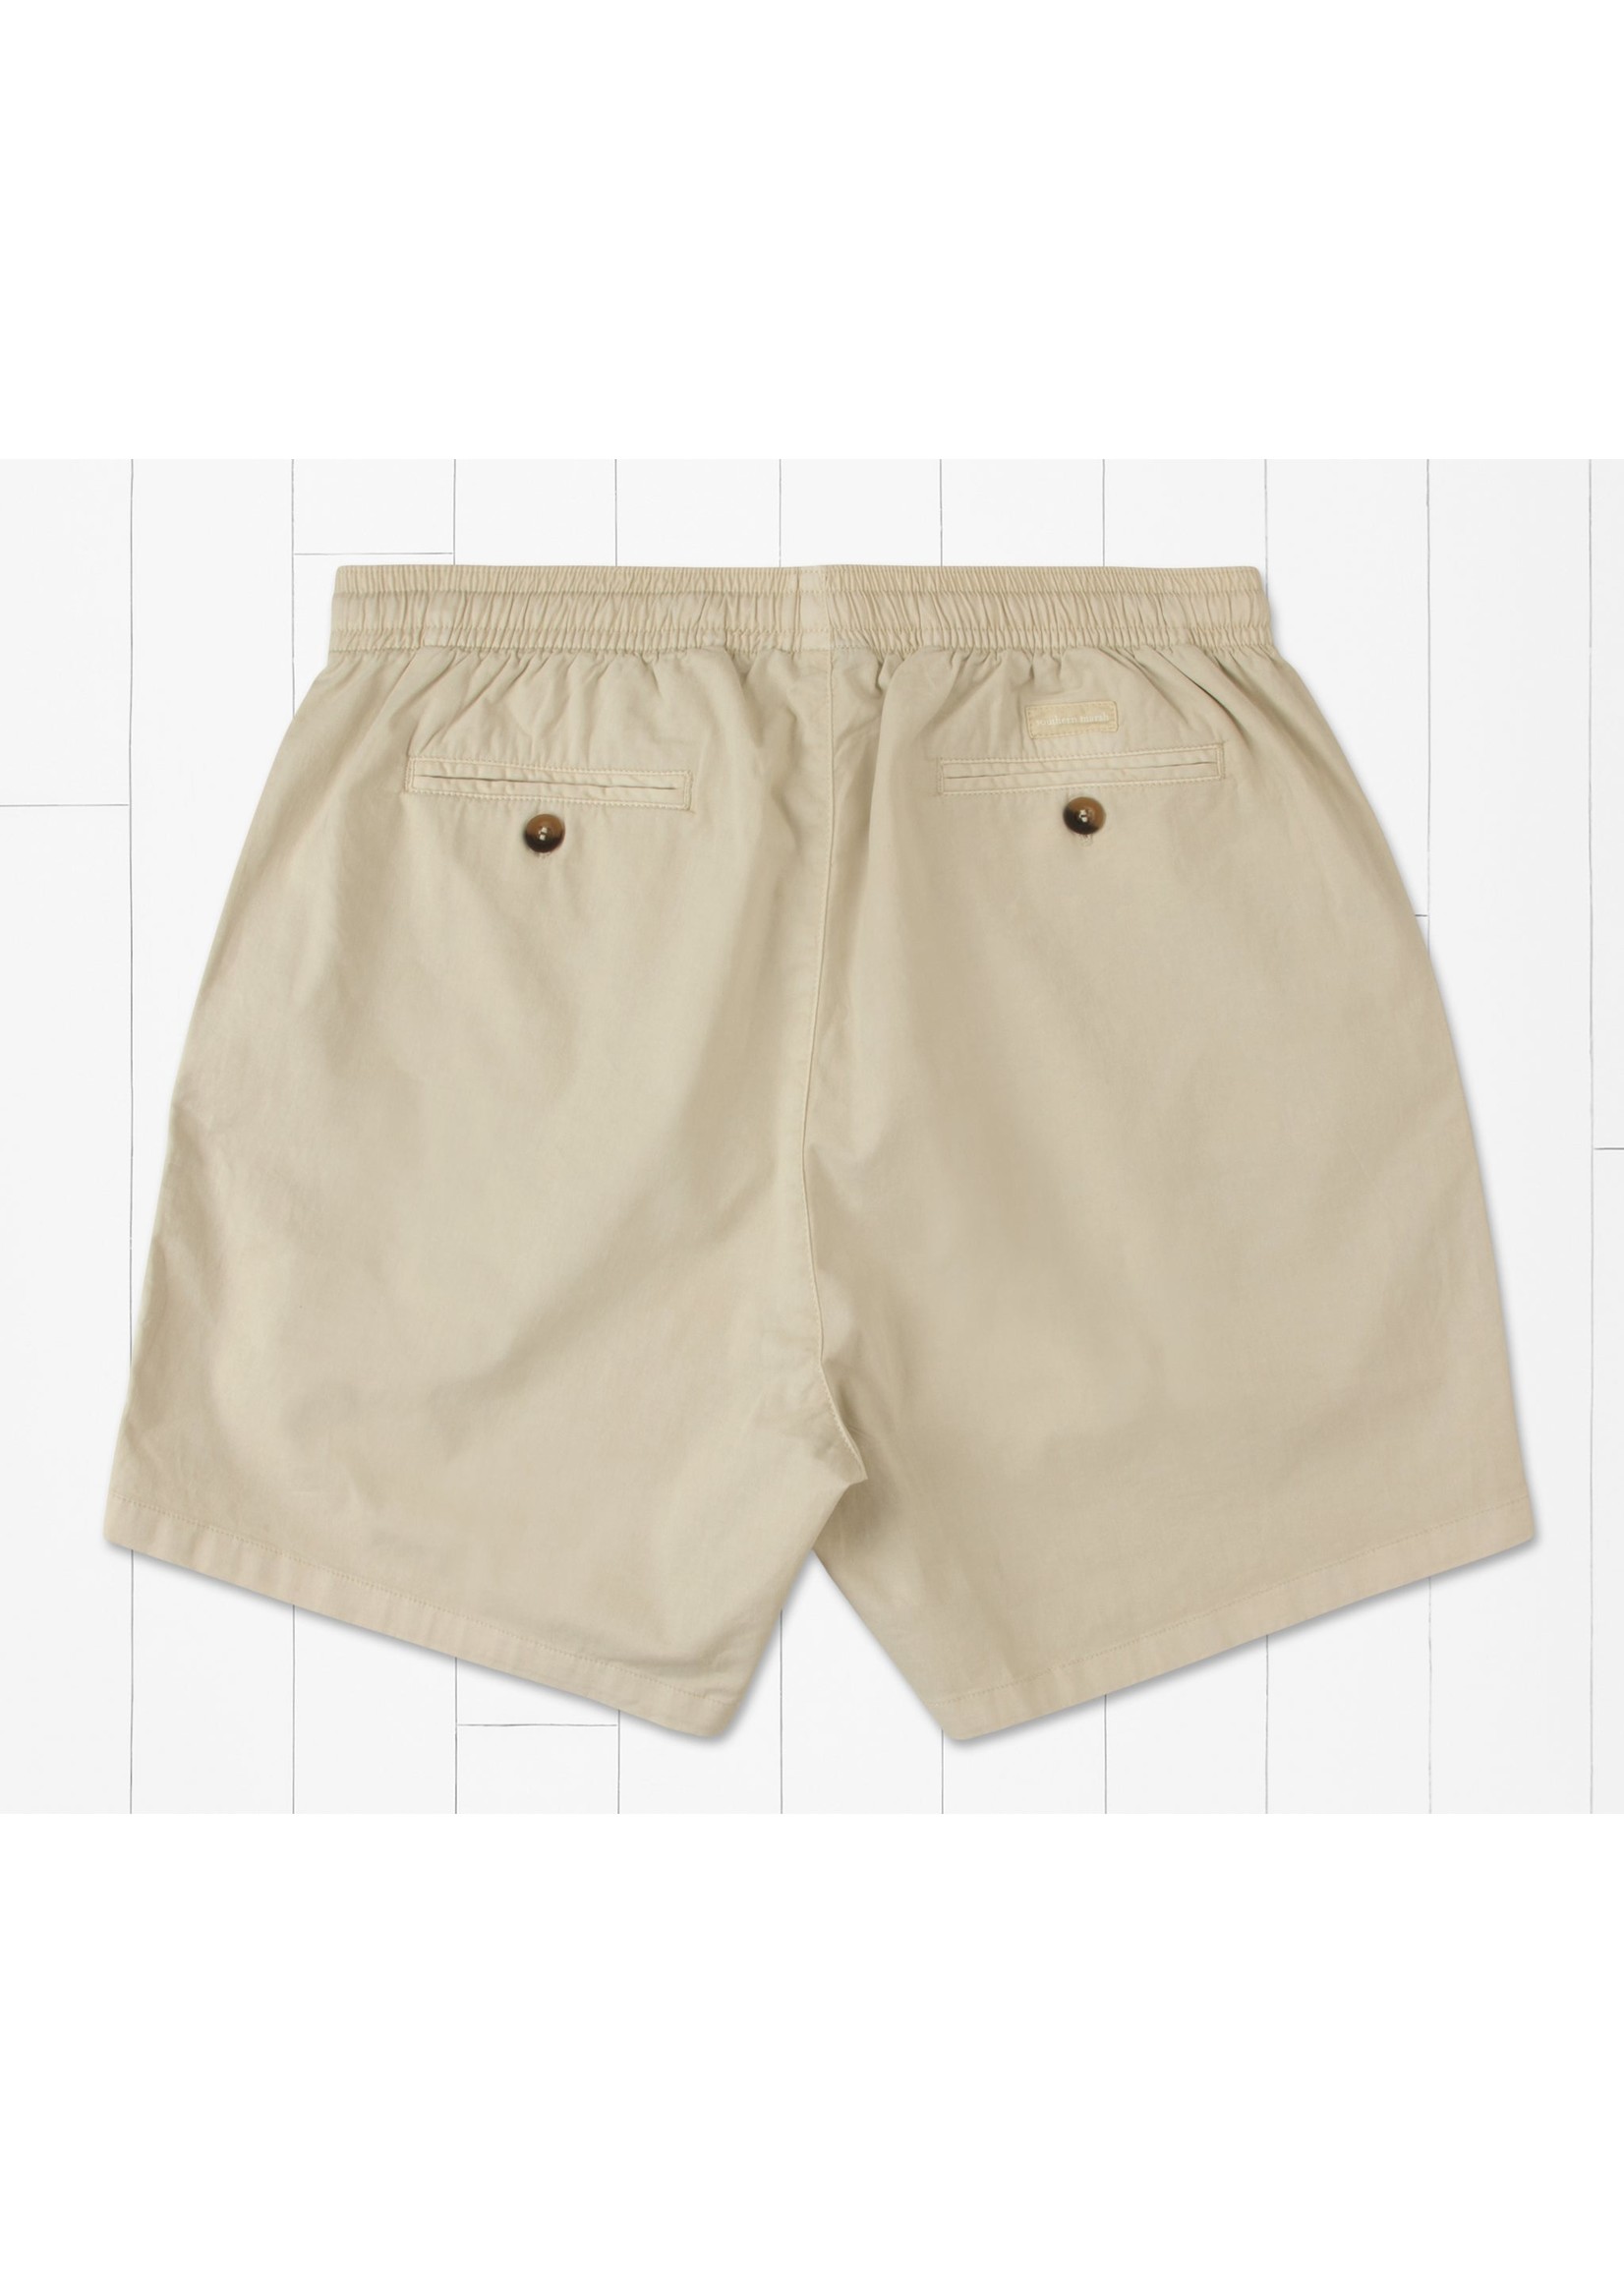 Southern Marsh Hartwell Washed Short